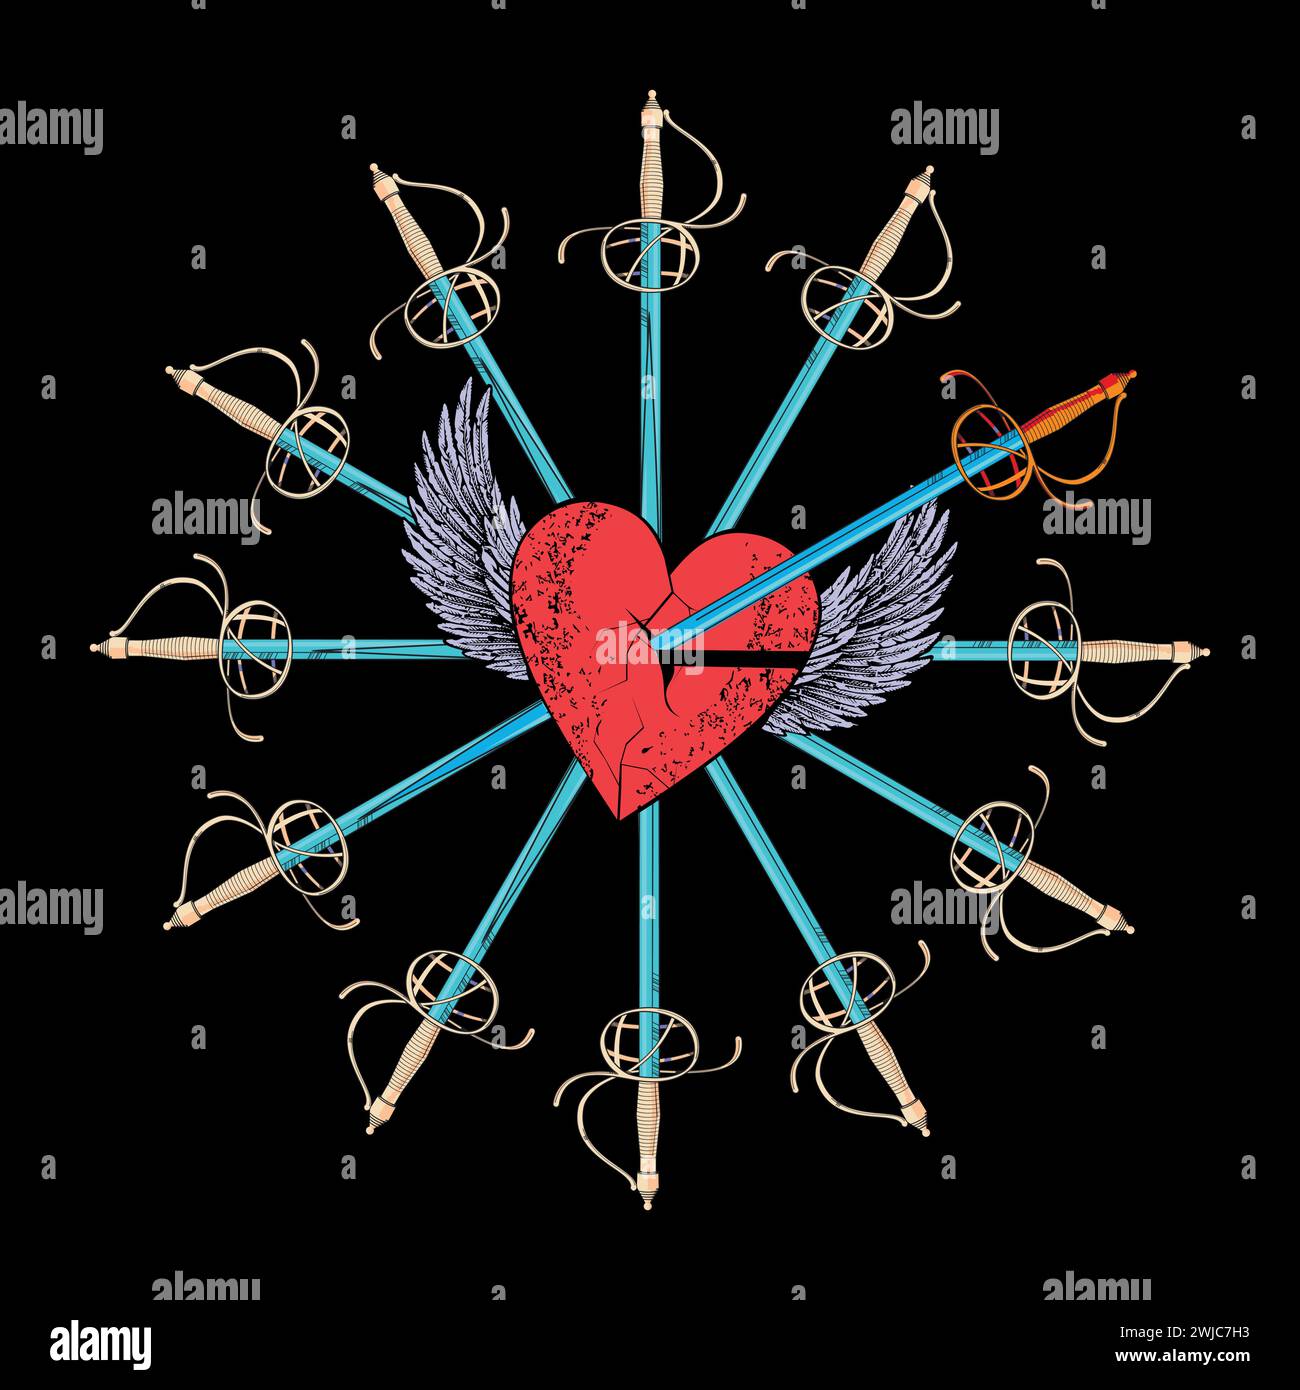 Winged heart t-shirt design with a stuck sword and multiple swords forming a circle on a black background. Stock Vector